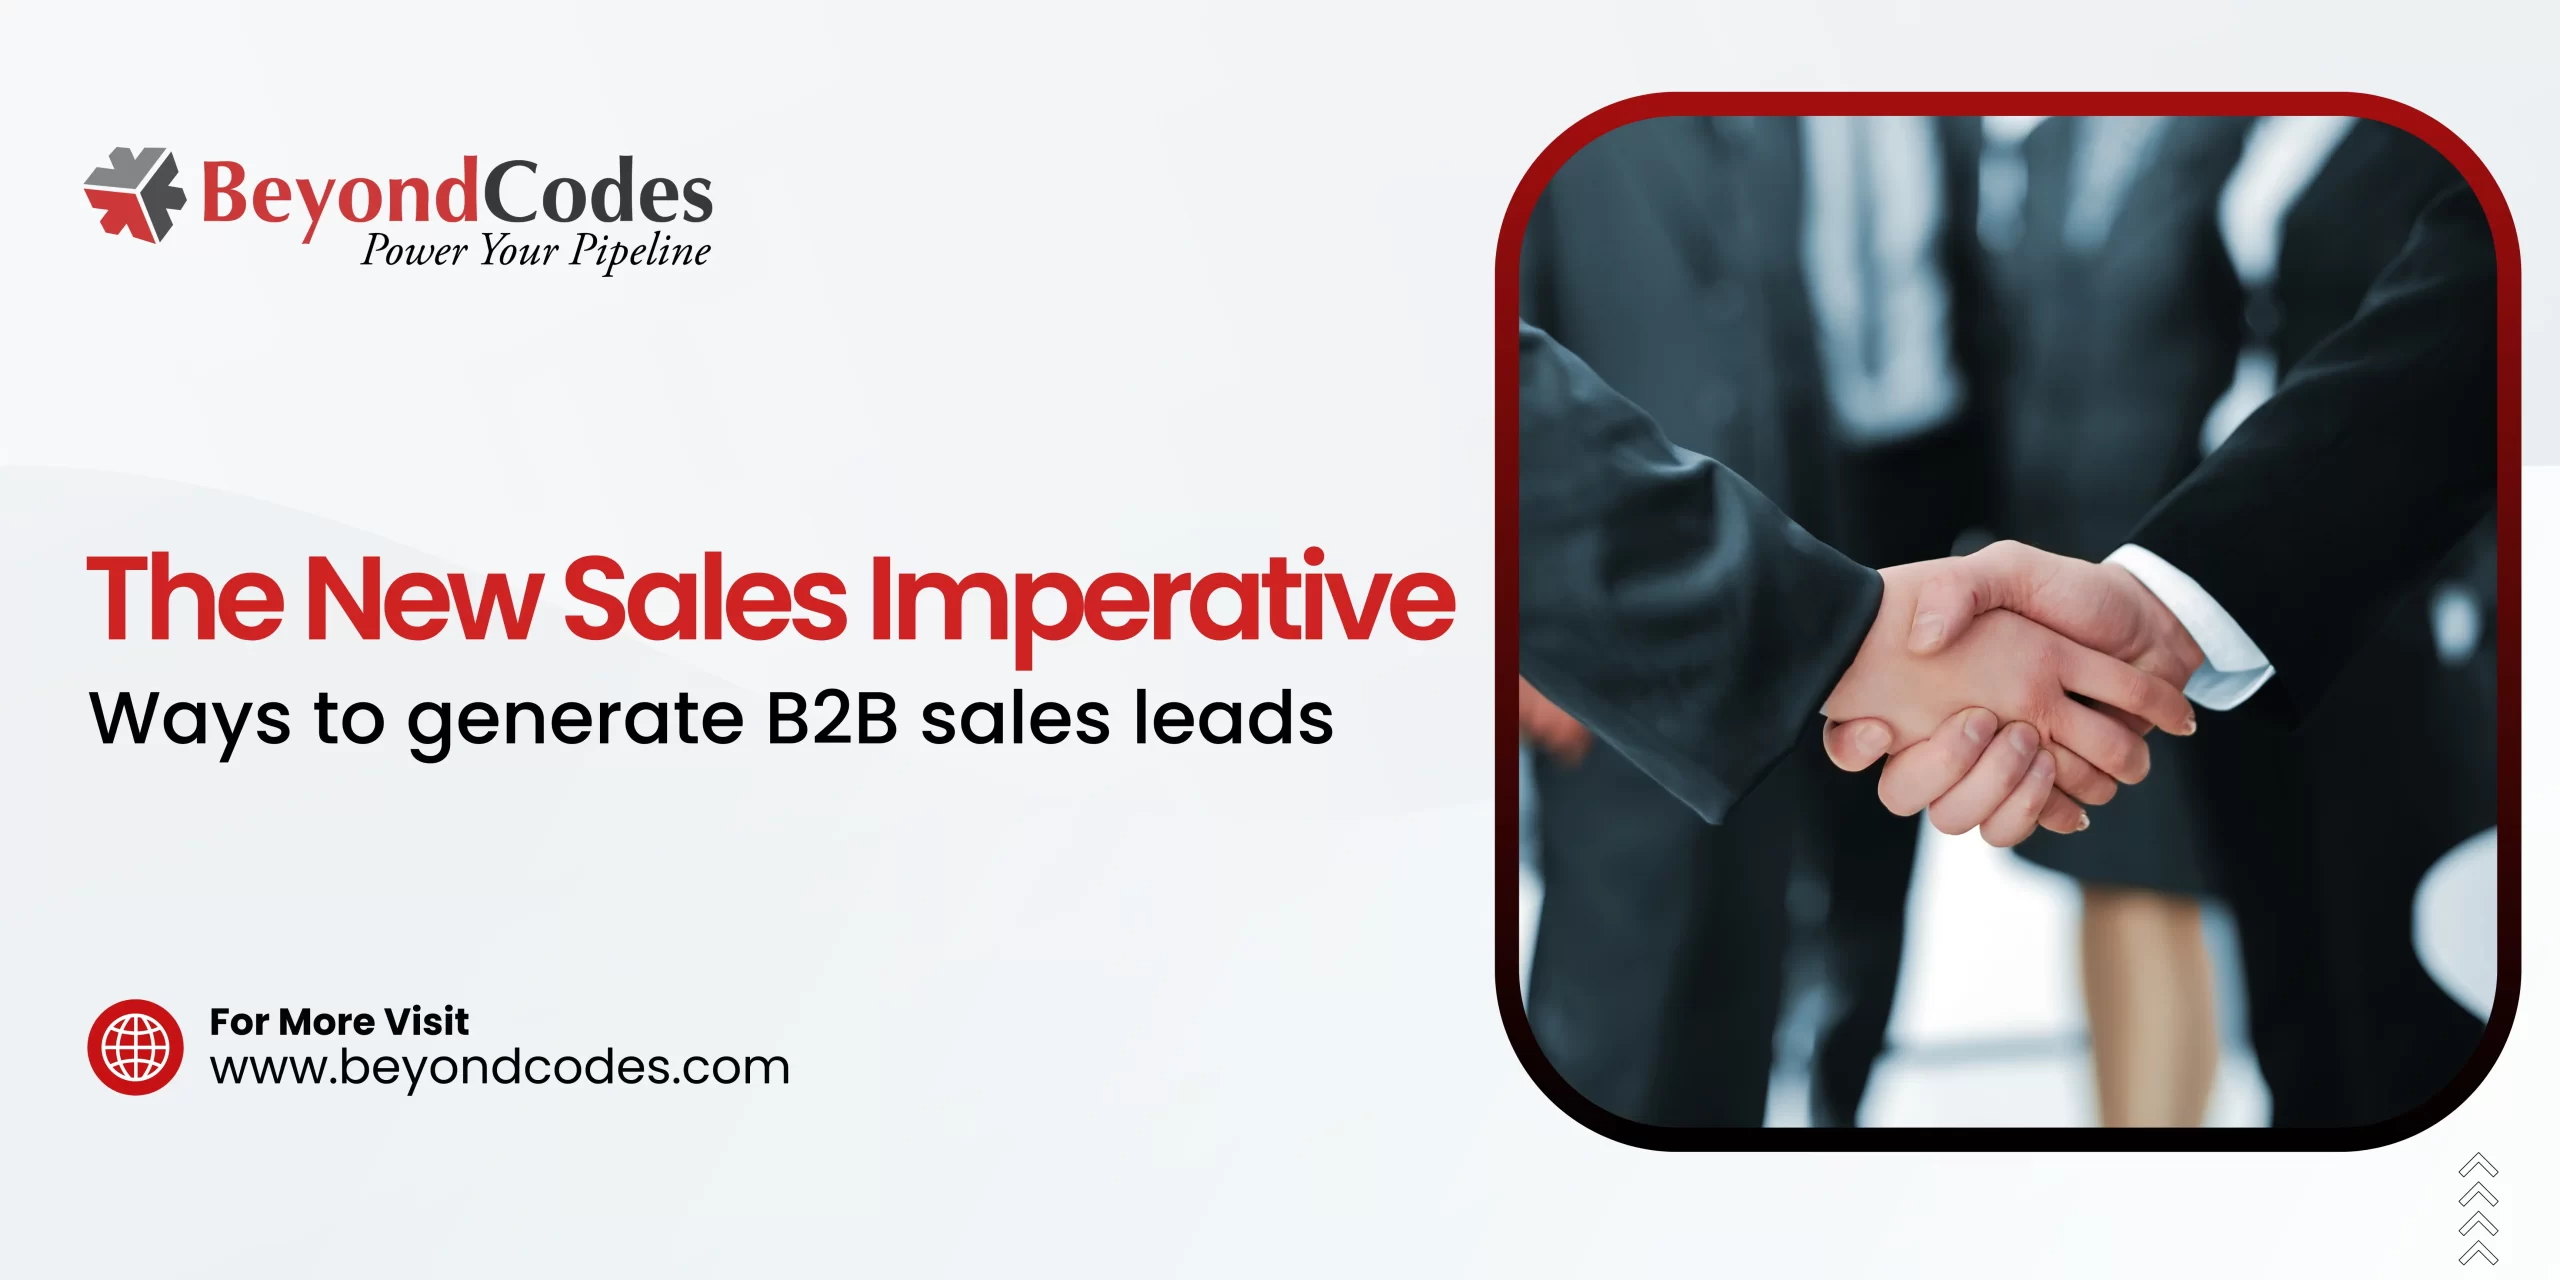 THE NEW SALES IMPERATIVE WAYS TO GENERATE B2B SALES LEADS